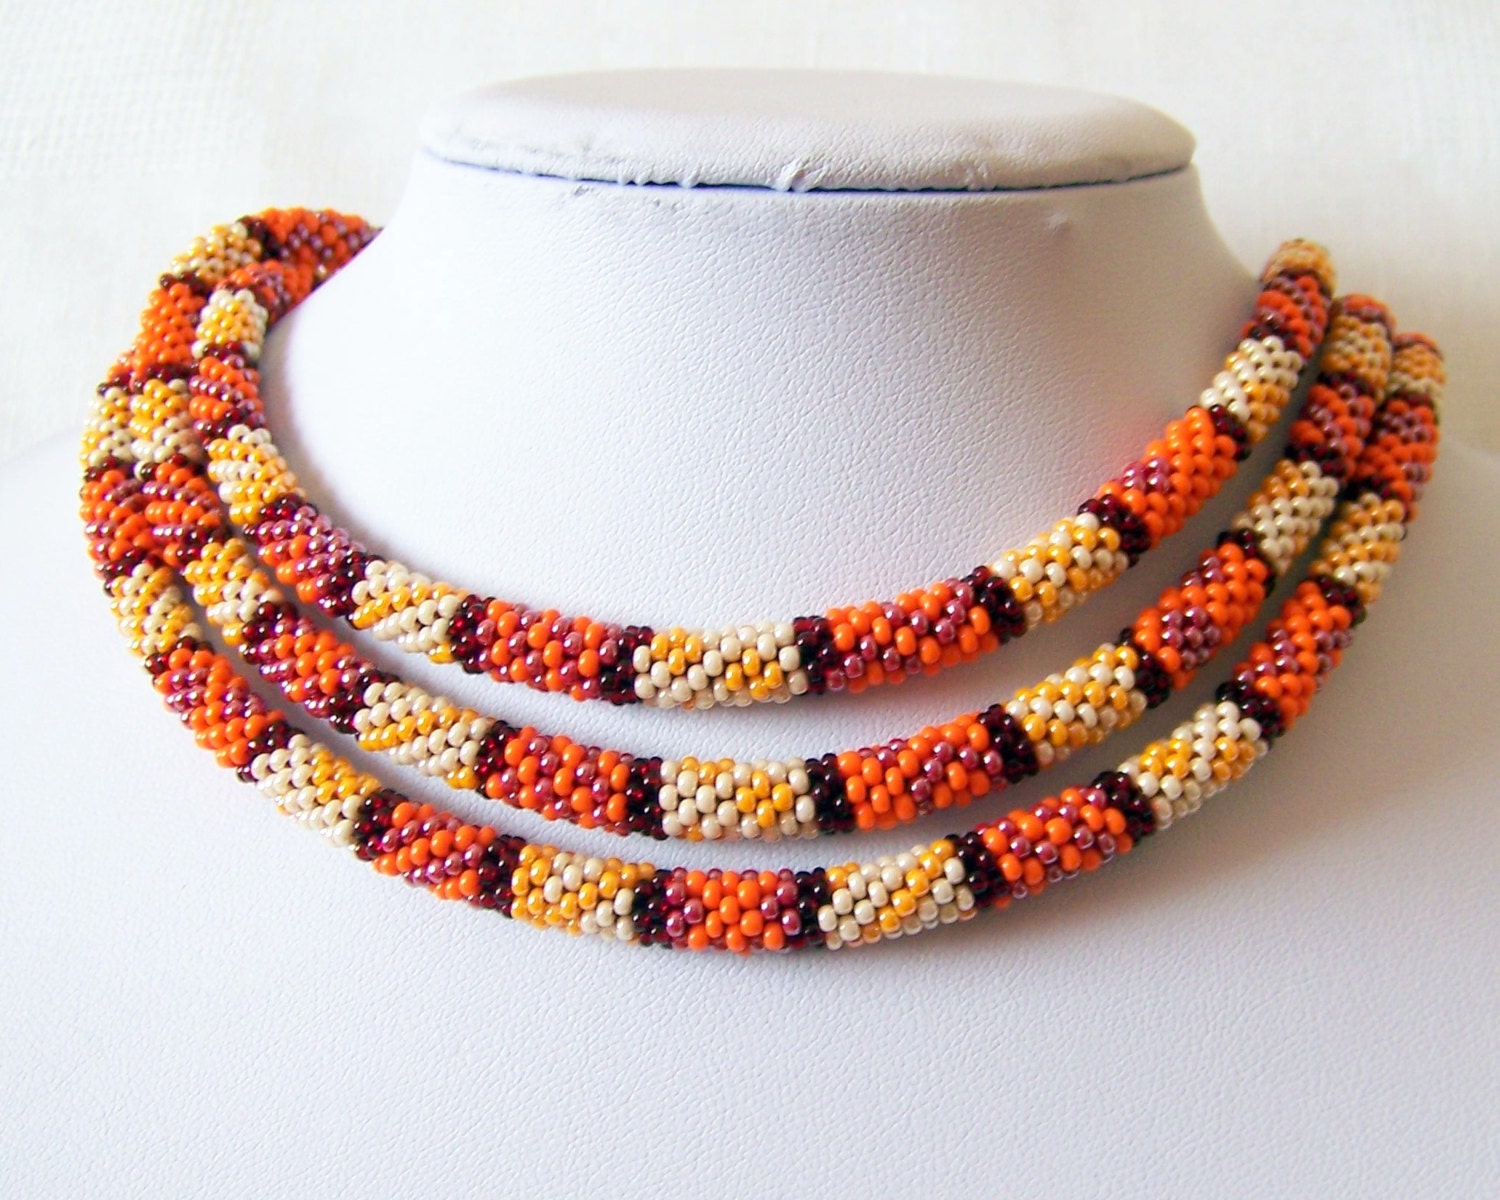 Long Beaded Crochet Rope - Fall Fashion - Geometric  - Patchwork - colorful bohemian jewelry - seed bead necklace - Orange - Red - Beige - lutita